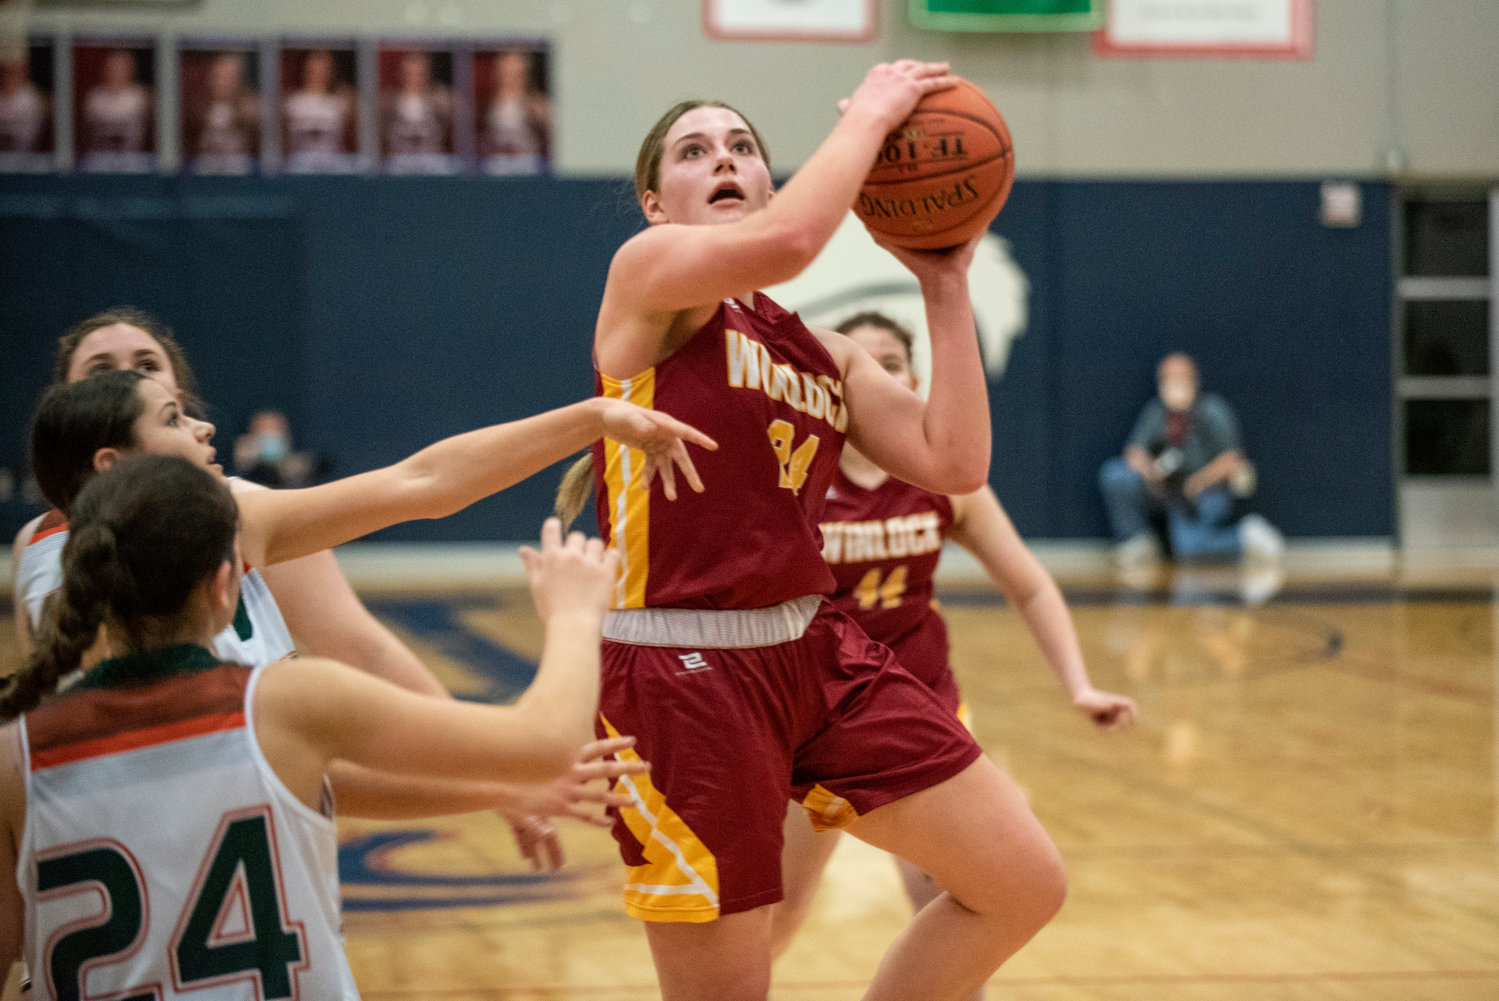 Winlock senior Addison Hall (24) drives for a shot against Morton-White Pass in the district playoffs on Feb. 8 at Black Hills High School.